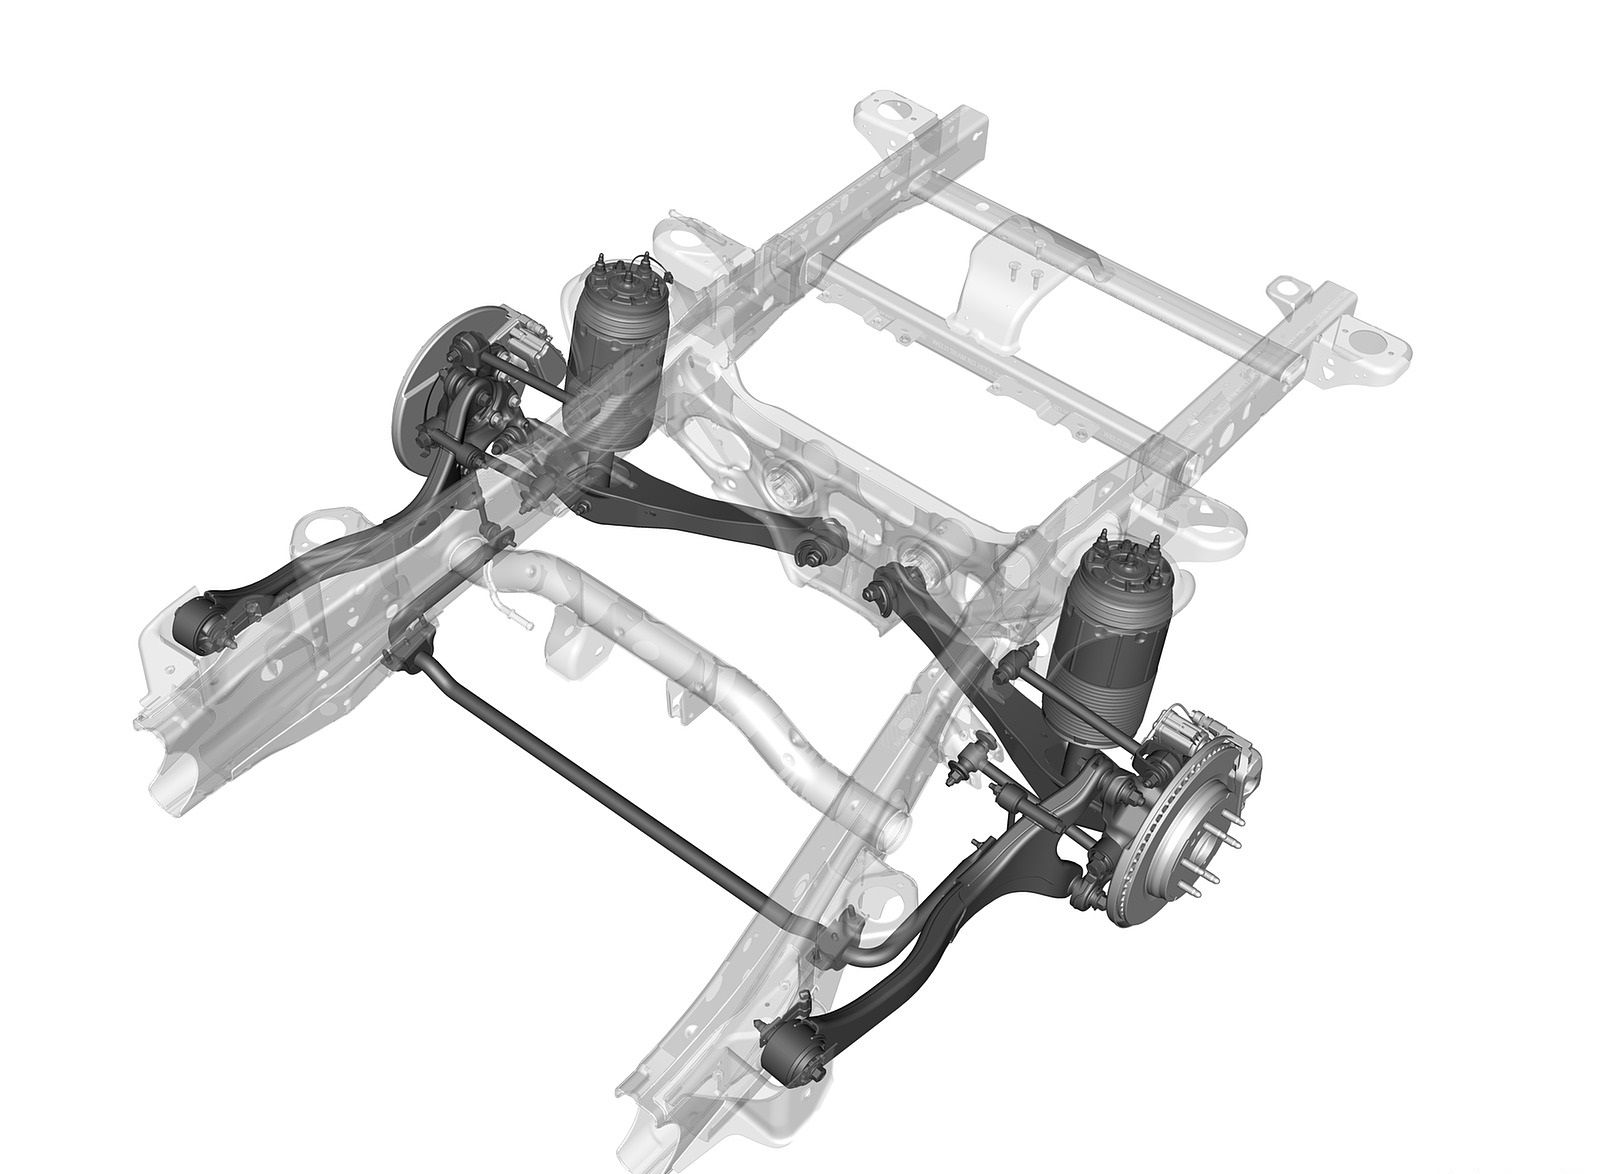 Chevrolet Suburban All New Independent Rear Suspension Wallpaper (30)